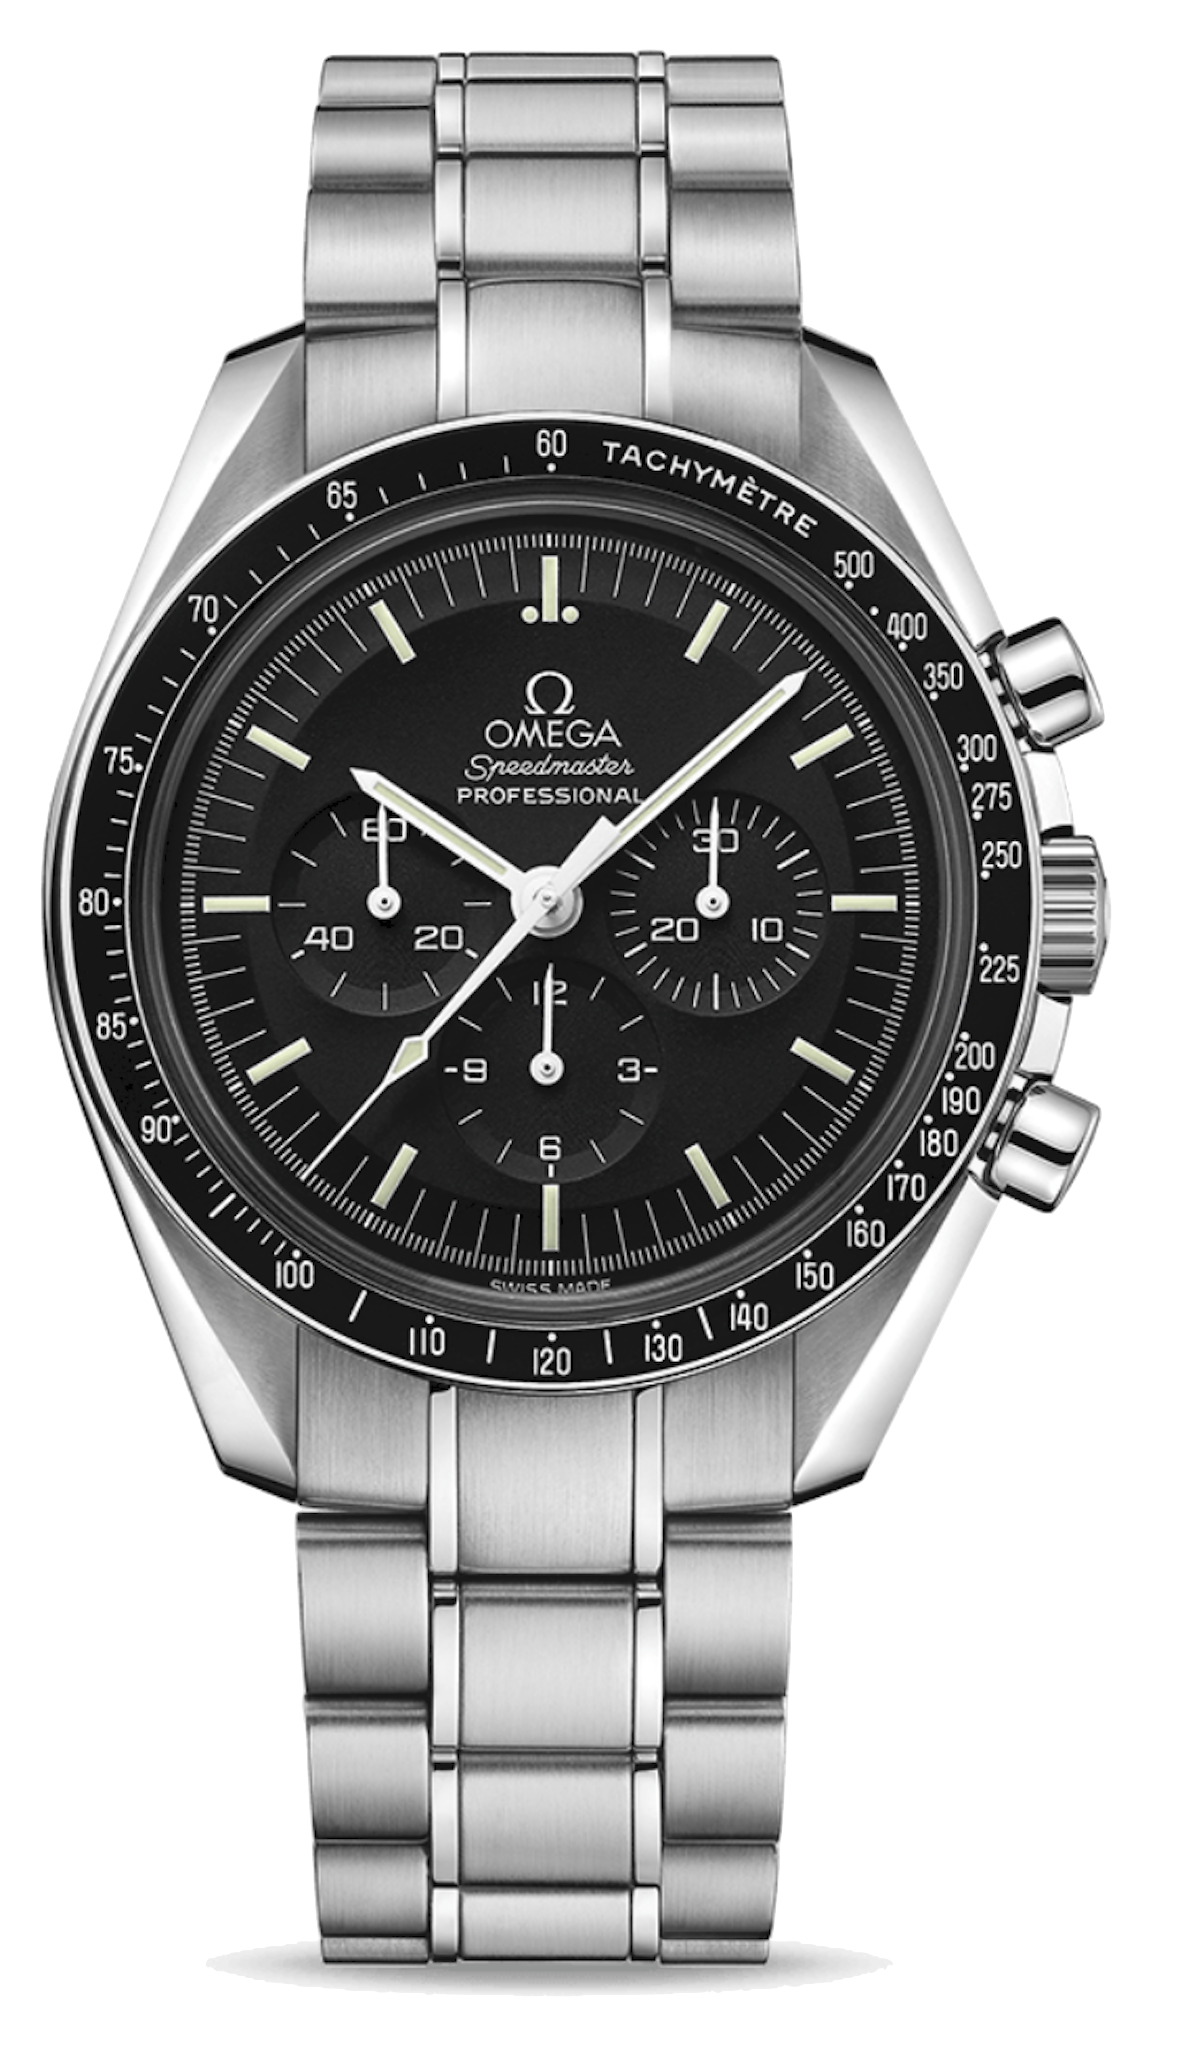 Black Dial watch with stainless steel bezel and clear back. On the Face of the dial it says Omega Sped Master Professional